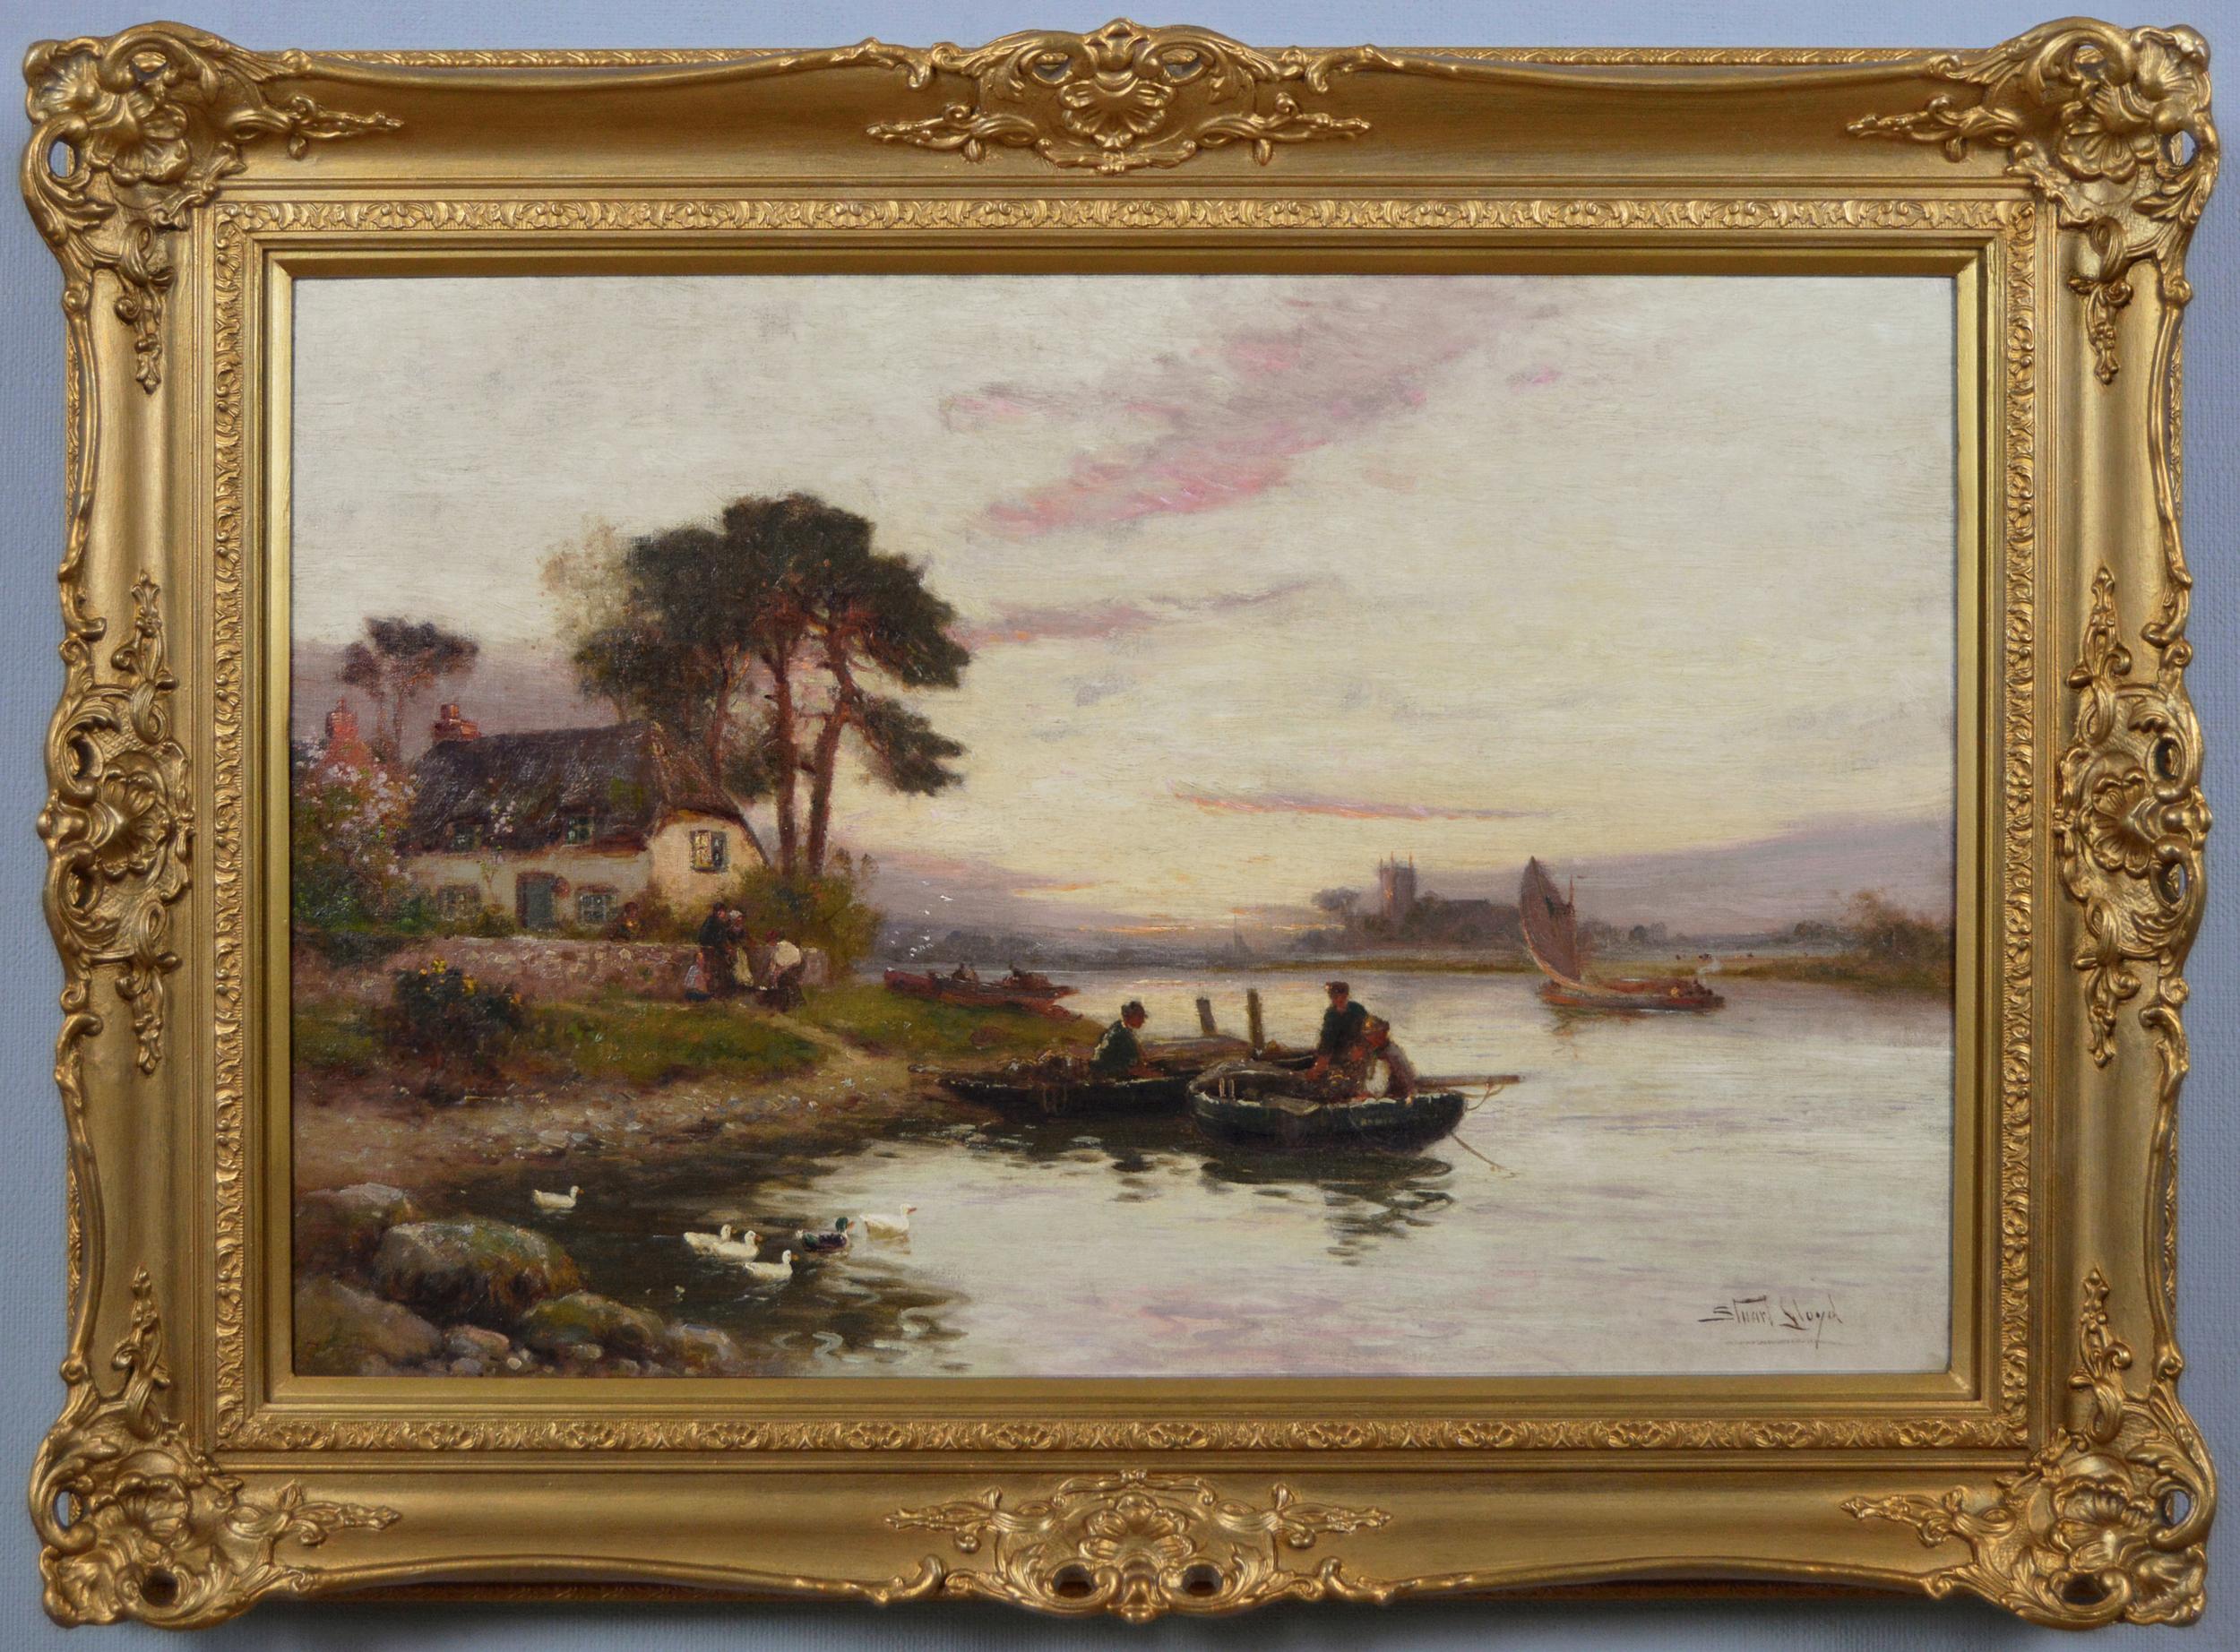 Walter Stuart Lloyd Landscape Painting - 19th Century river landscape oil painting of boats on a river 